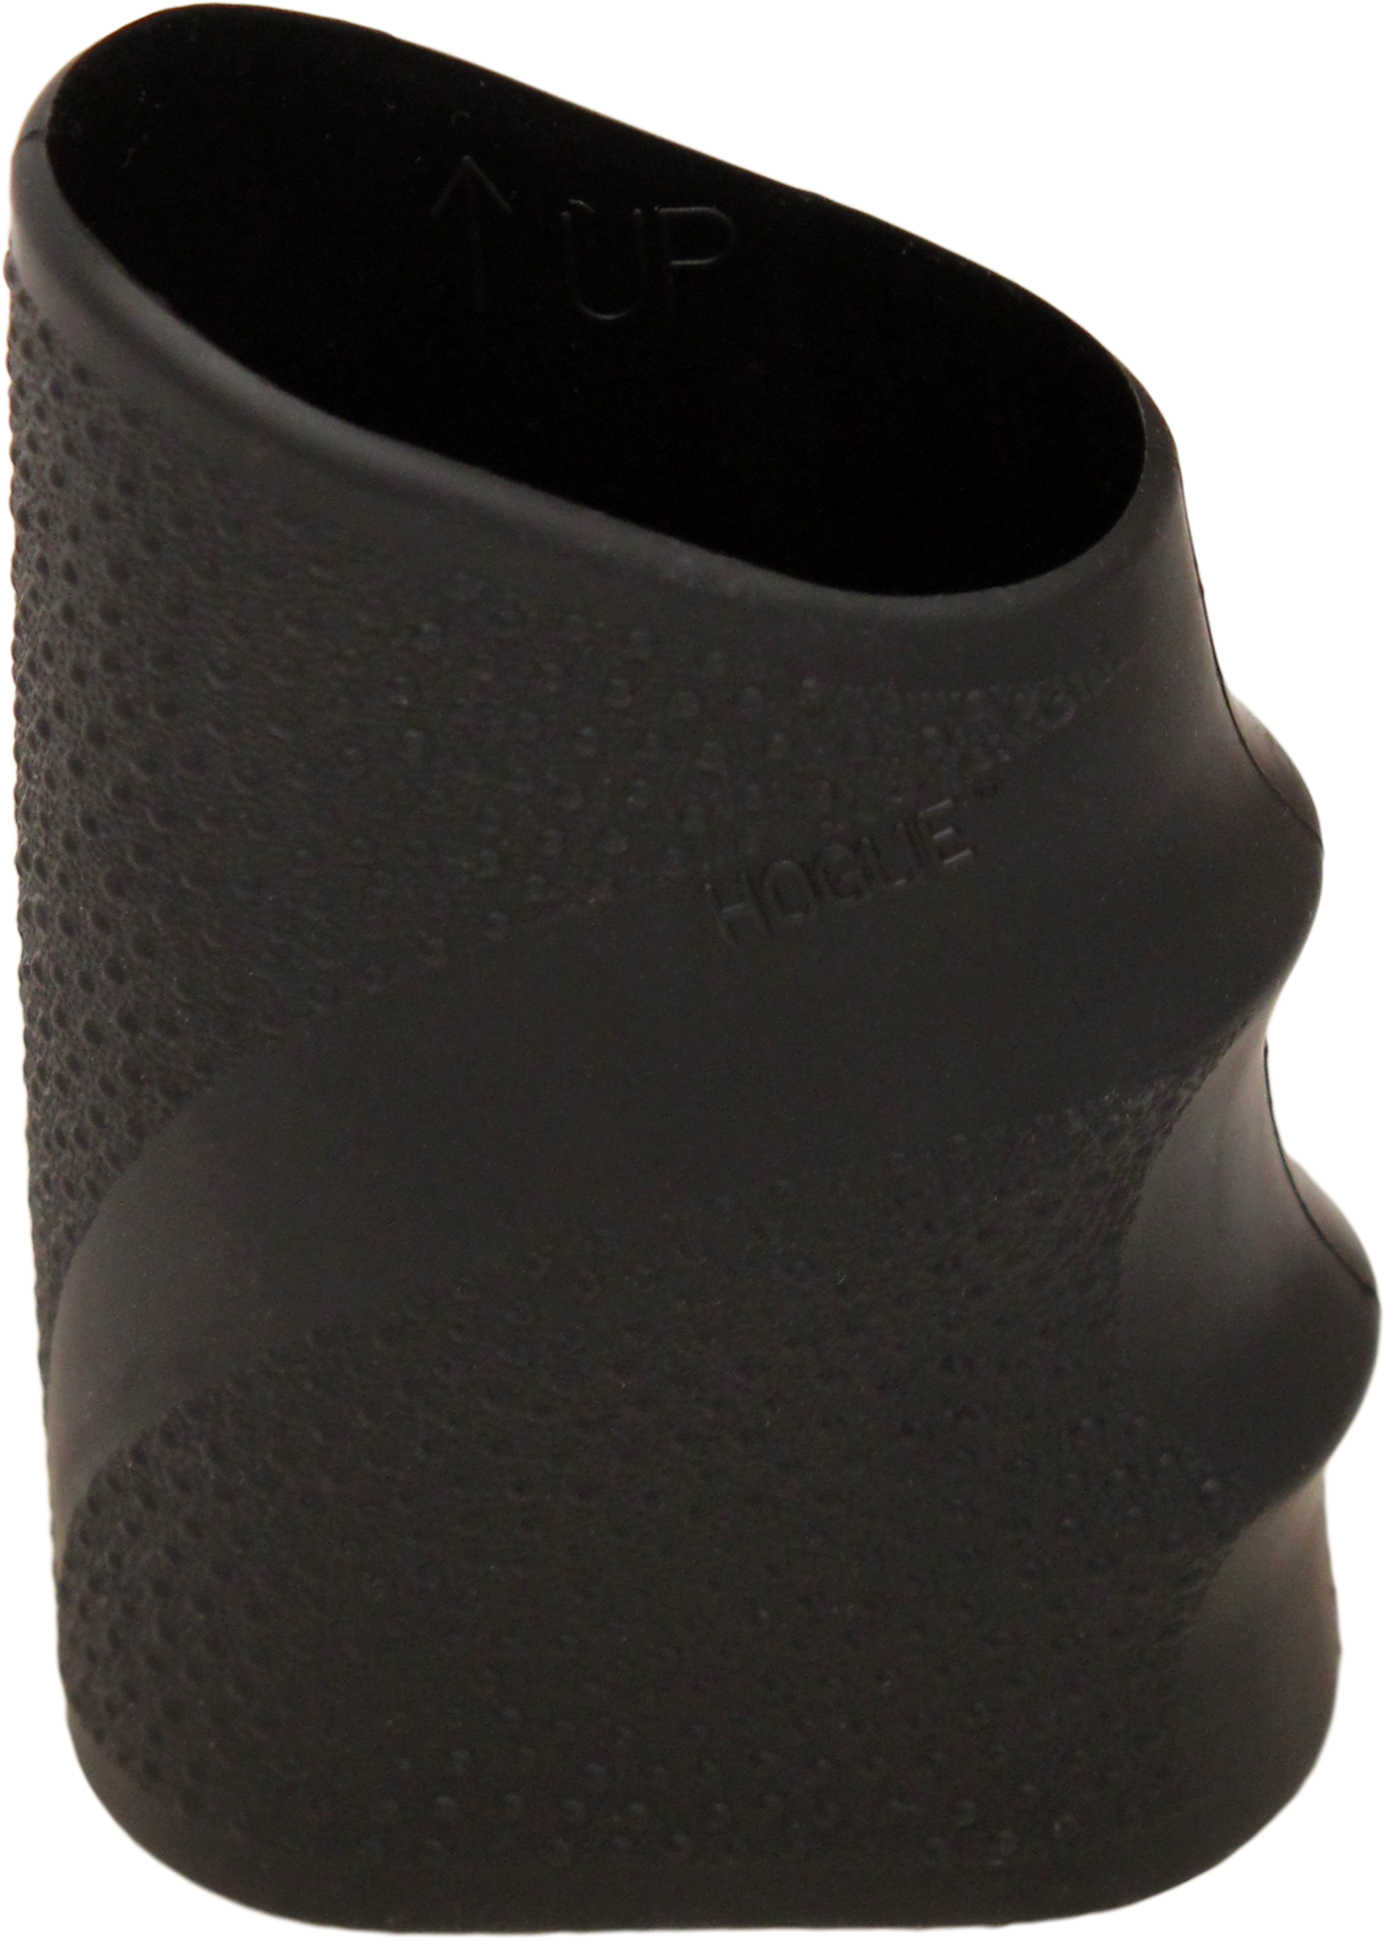 Hogue 17210 HandAll Tactical Large Grip Sleeve Textured Rubber Black